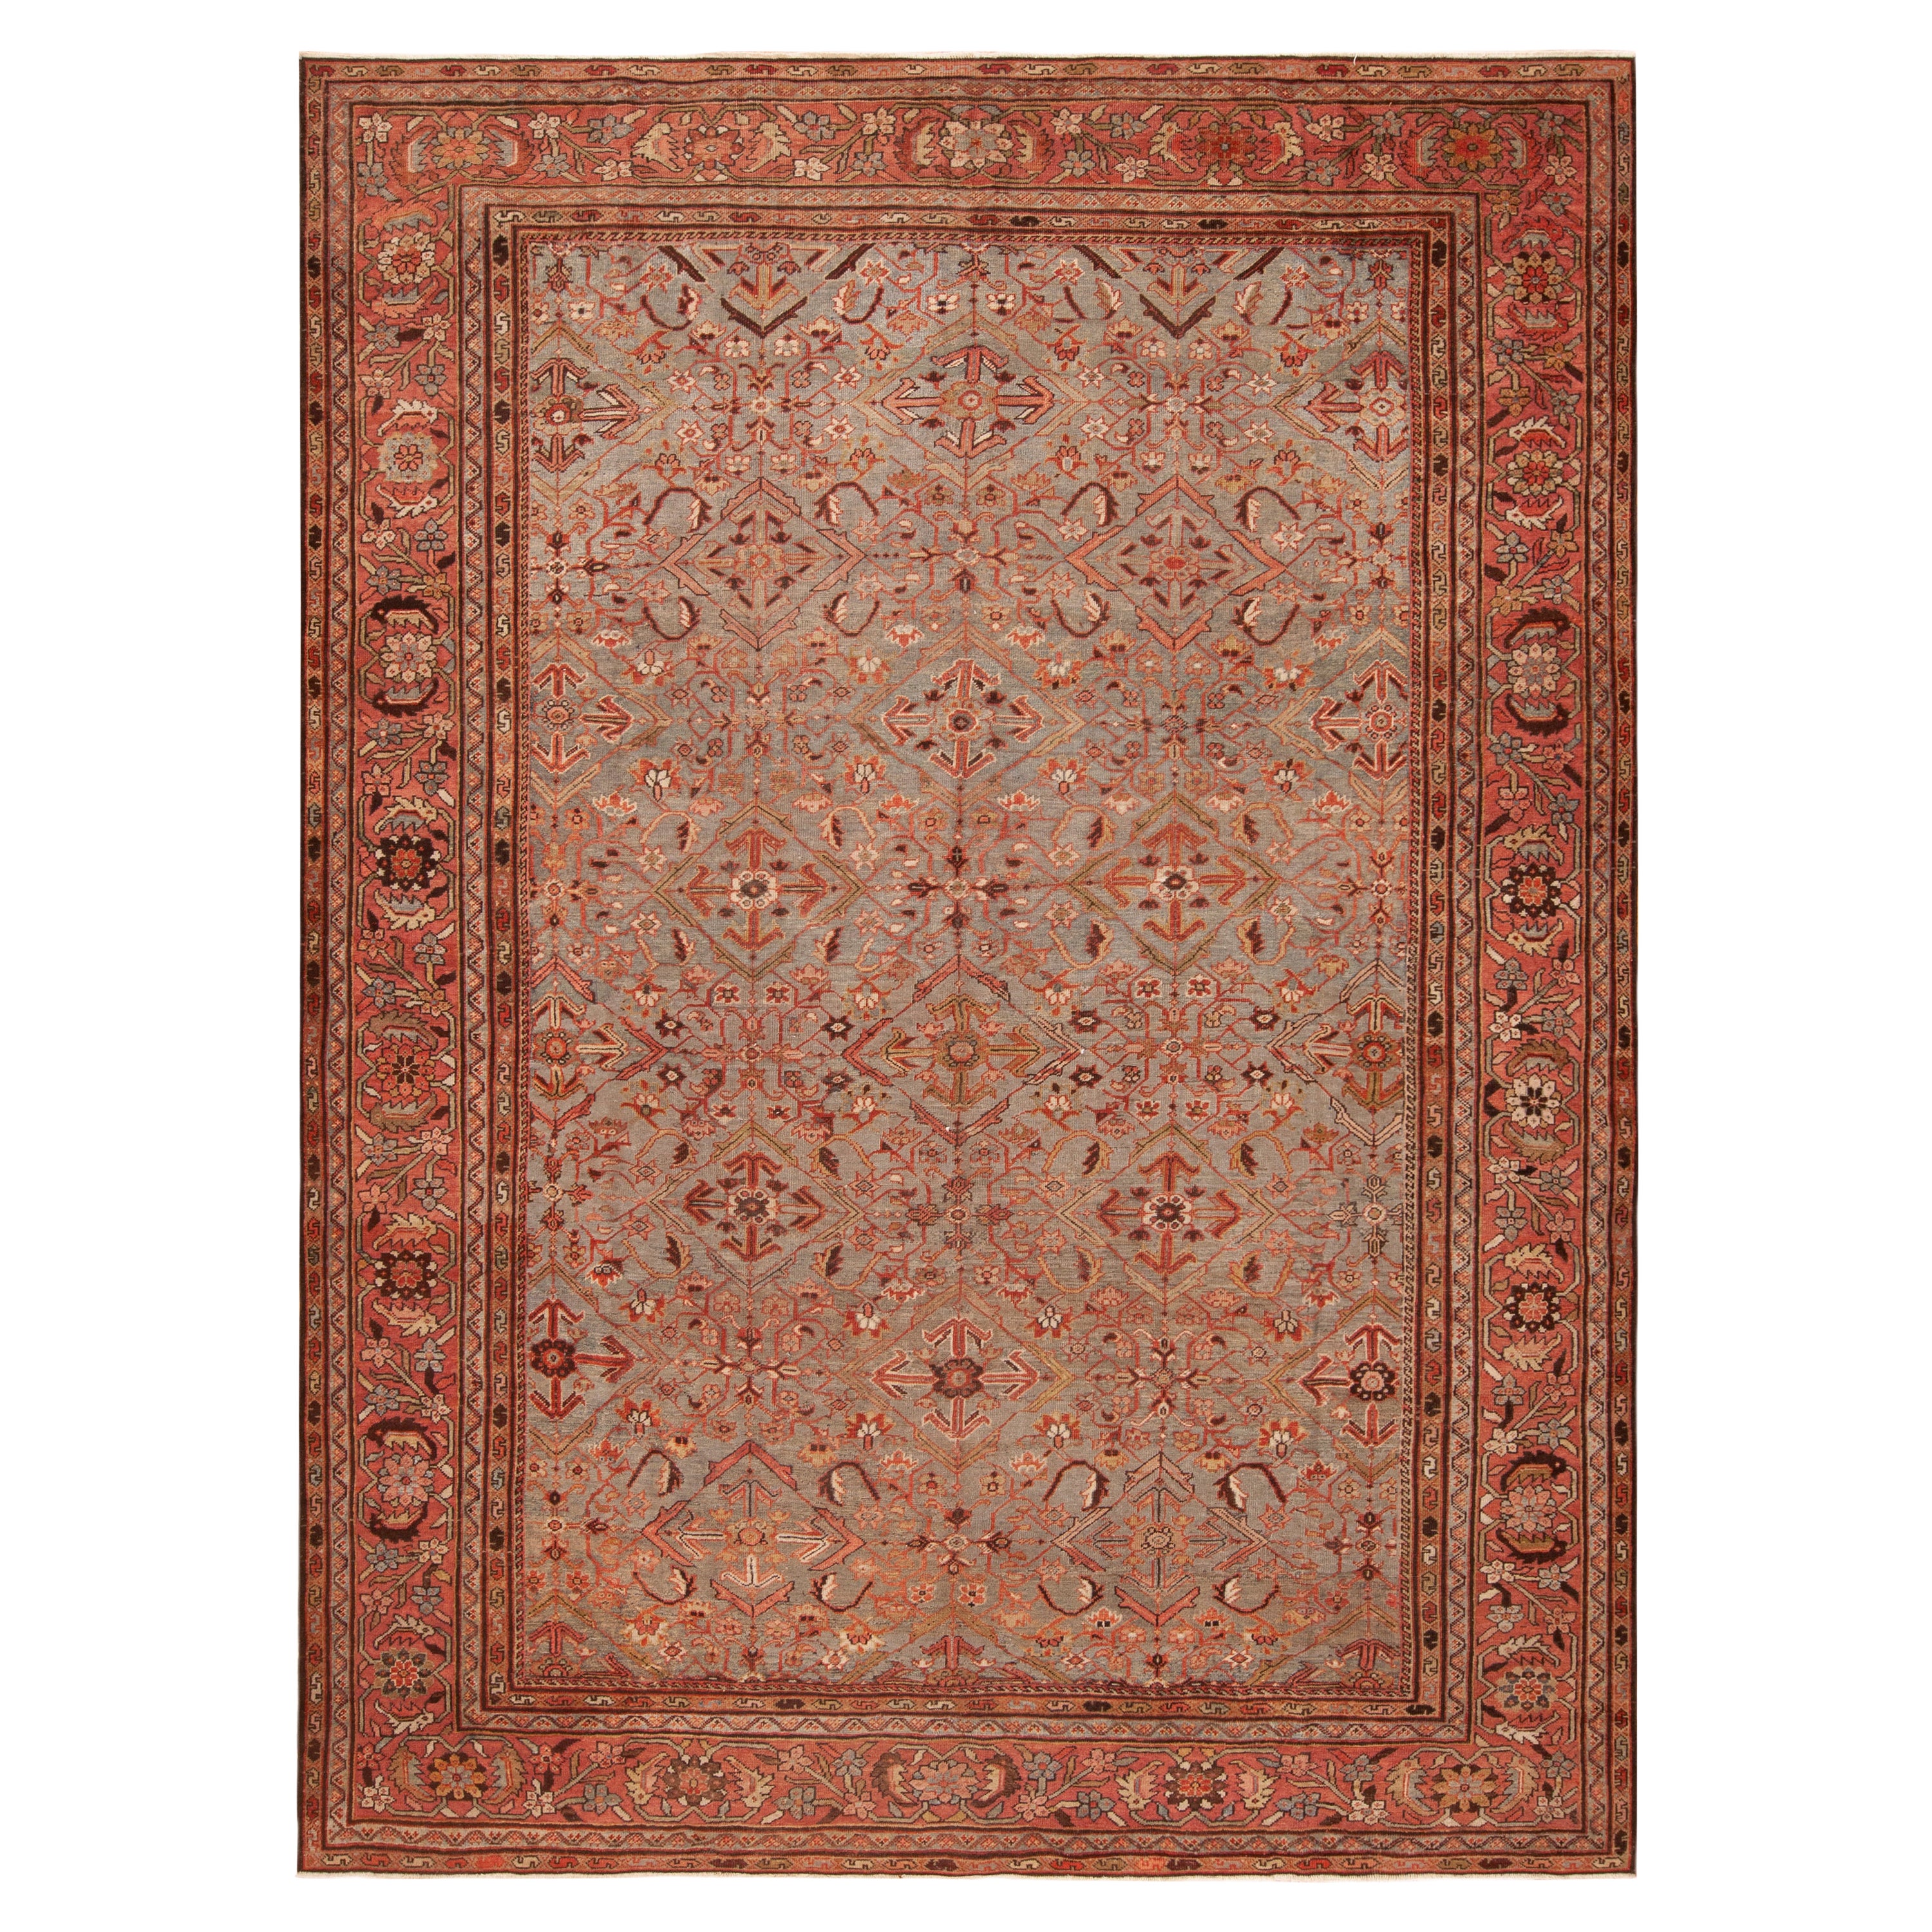 Highly Artistic Antique Light Blue Background Persian Sultanabad Rug 9' x 12' For Sale